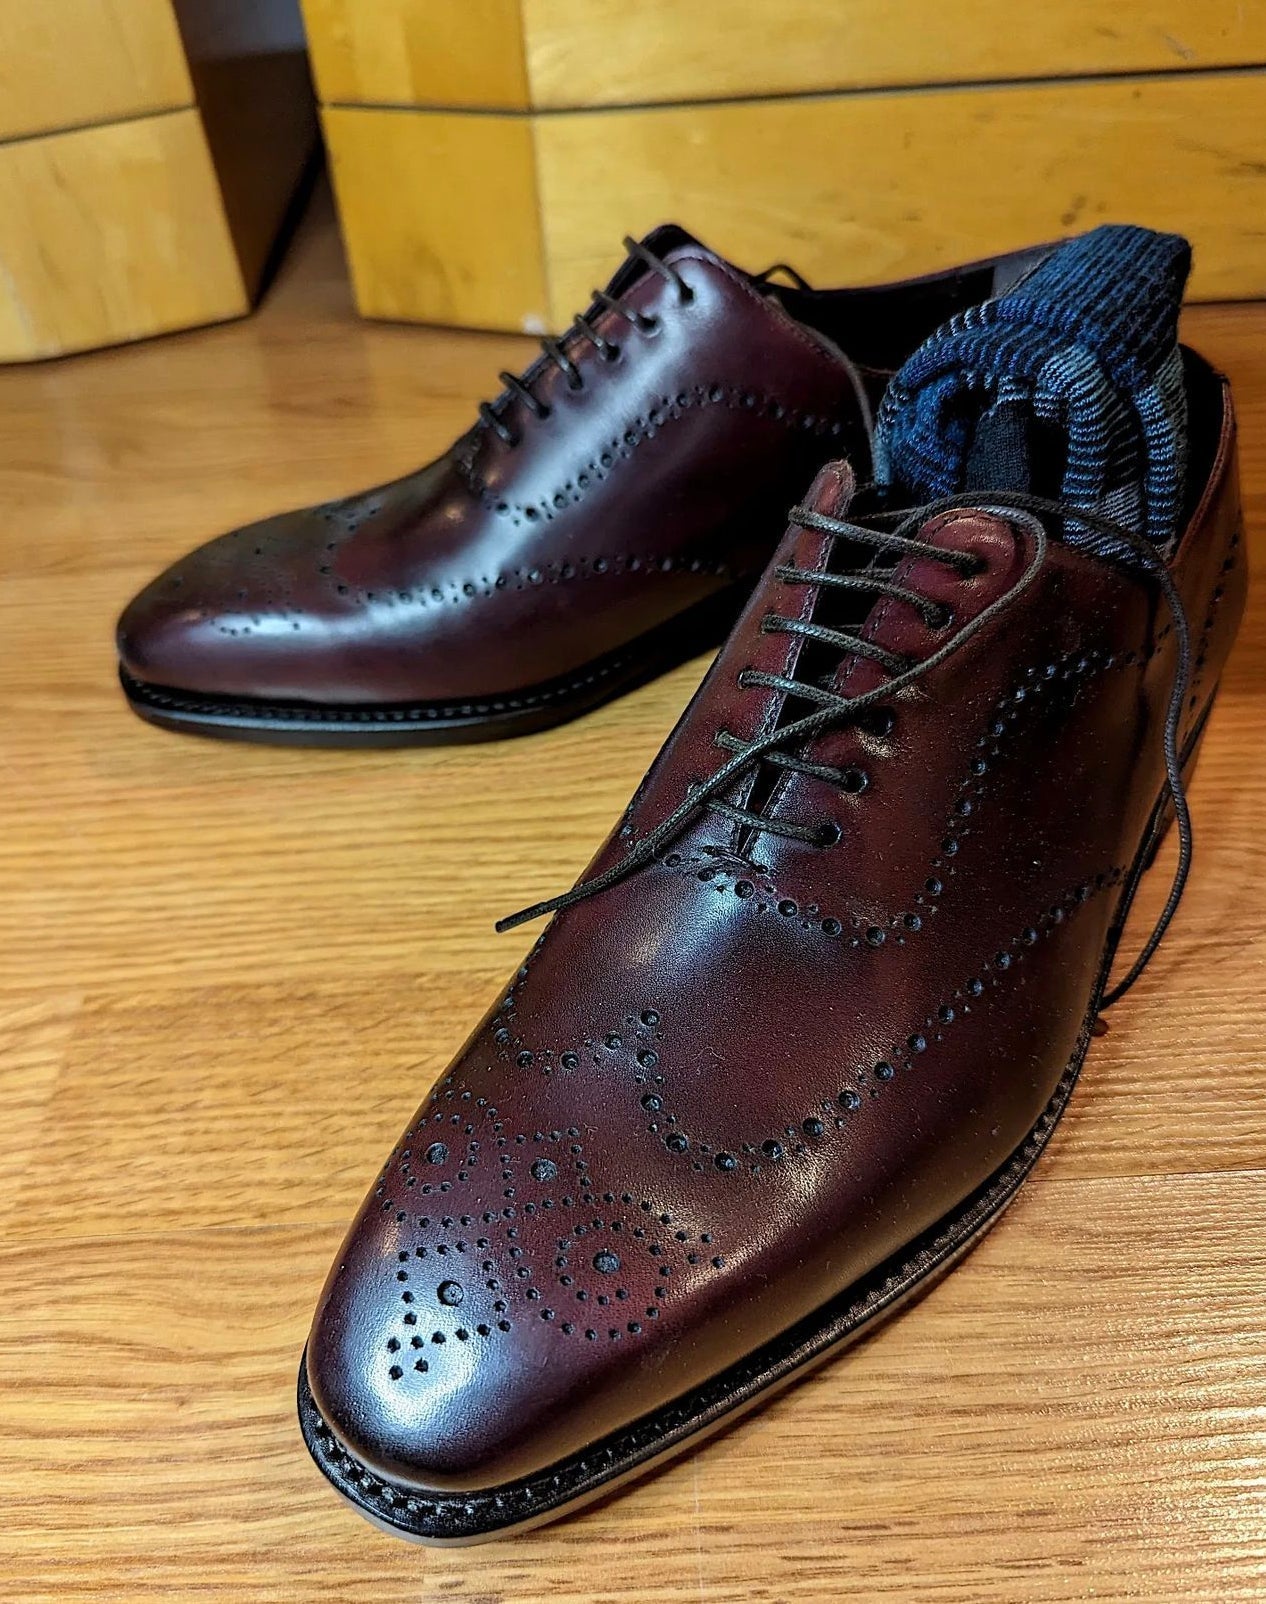 Wholecut Brogue in Burgundy Box Calf - Zatorres | Free Shipping on orders over $200